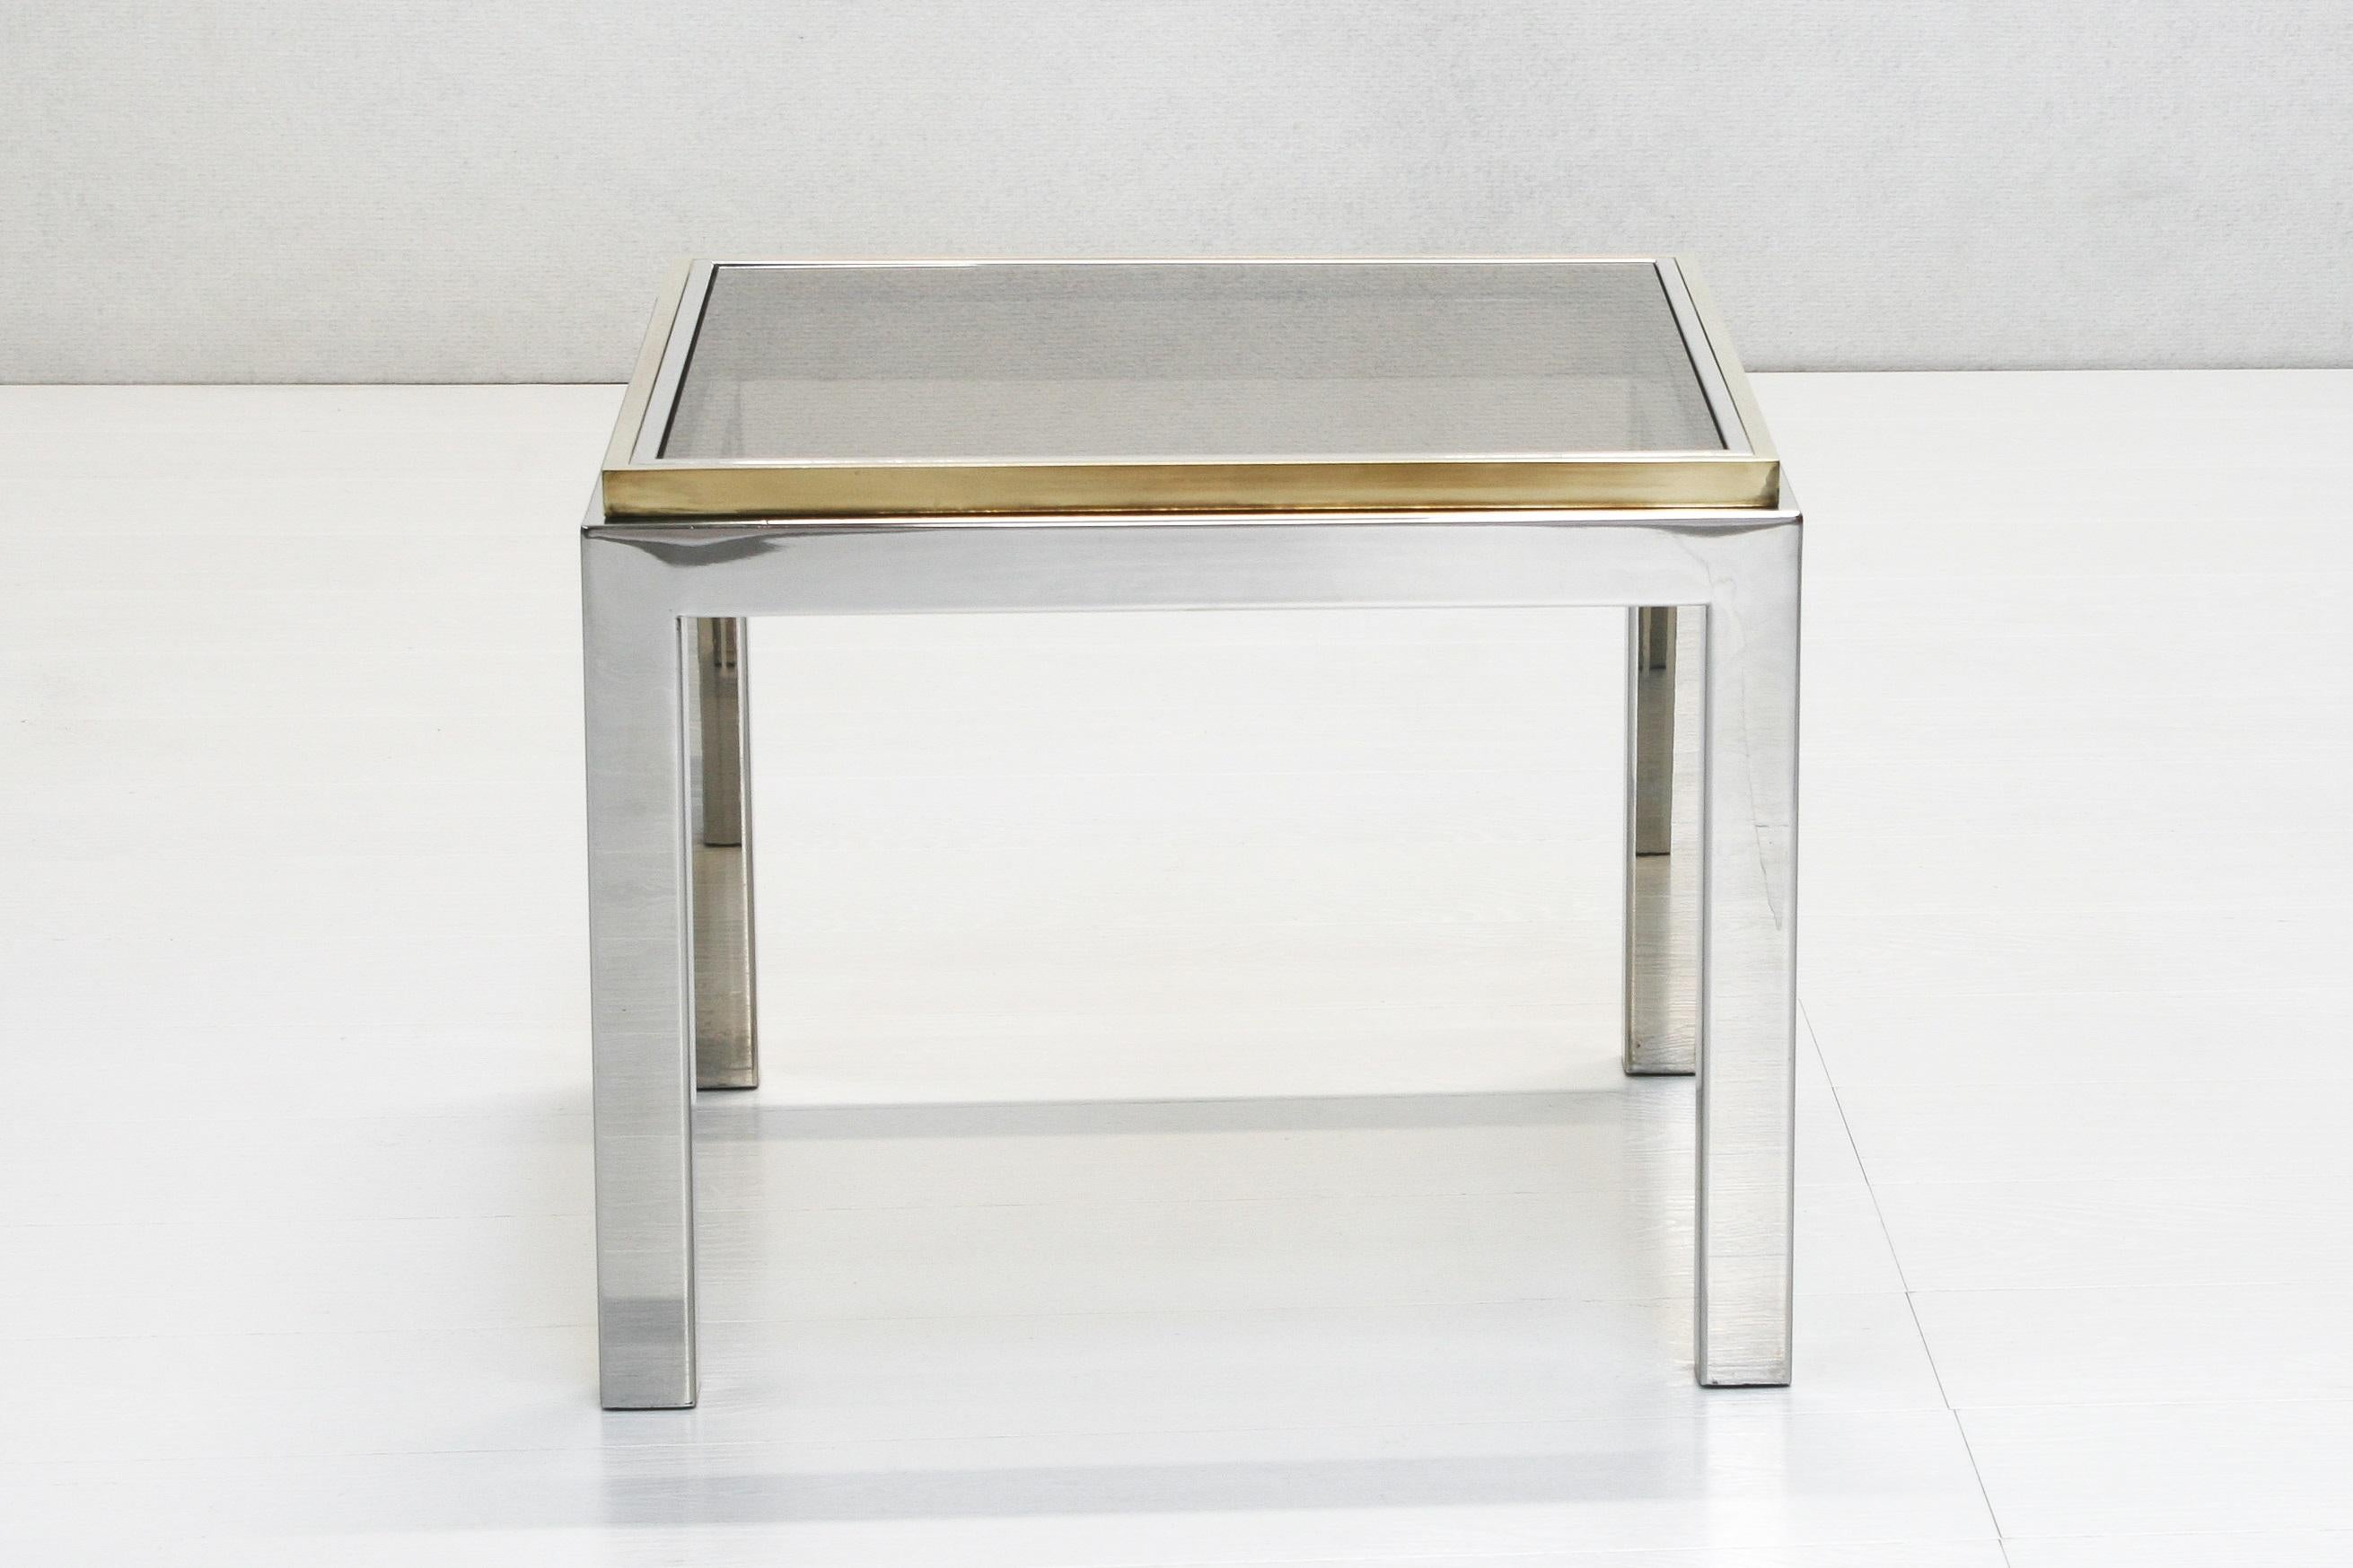 1970s Hollywood Regency Flaminia Smoked Glass Coffee & Side Table by Willy Rizzo For Sale 3